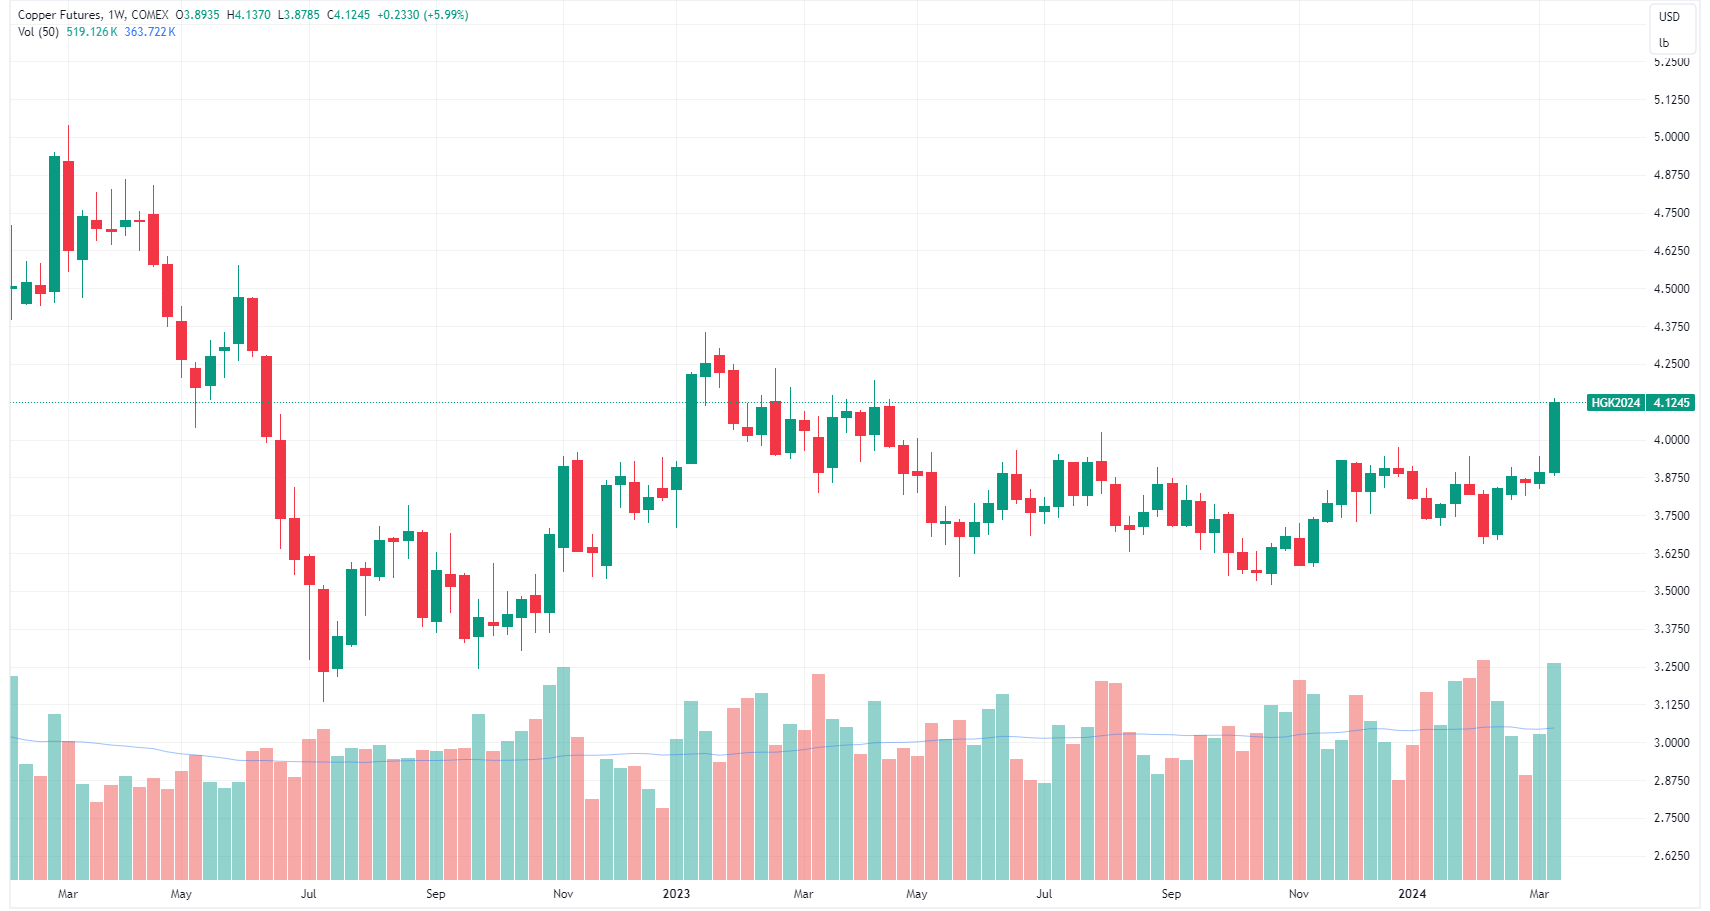 Copper futures weekly chart (Source: TradingView)